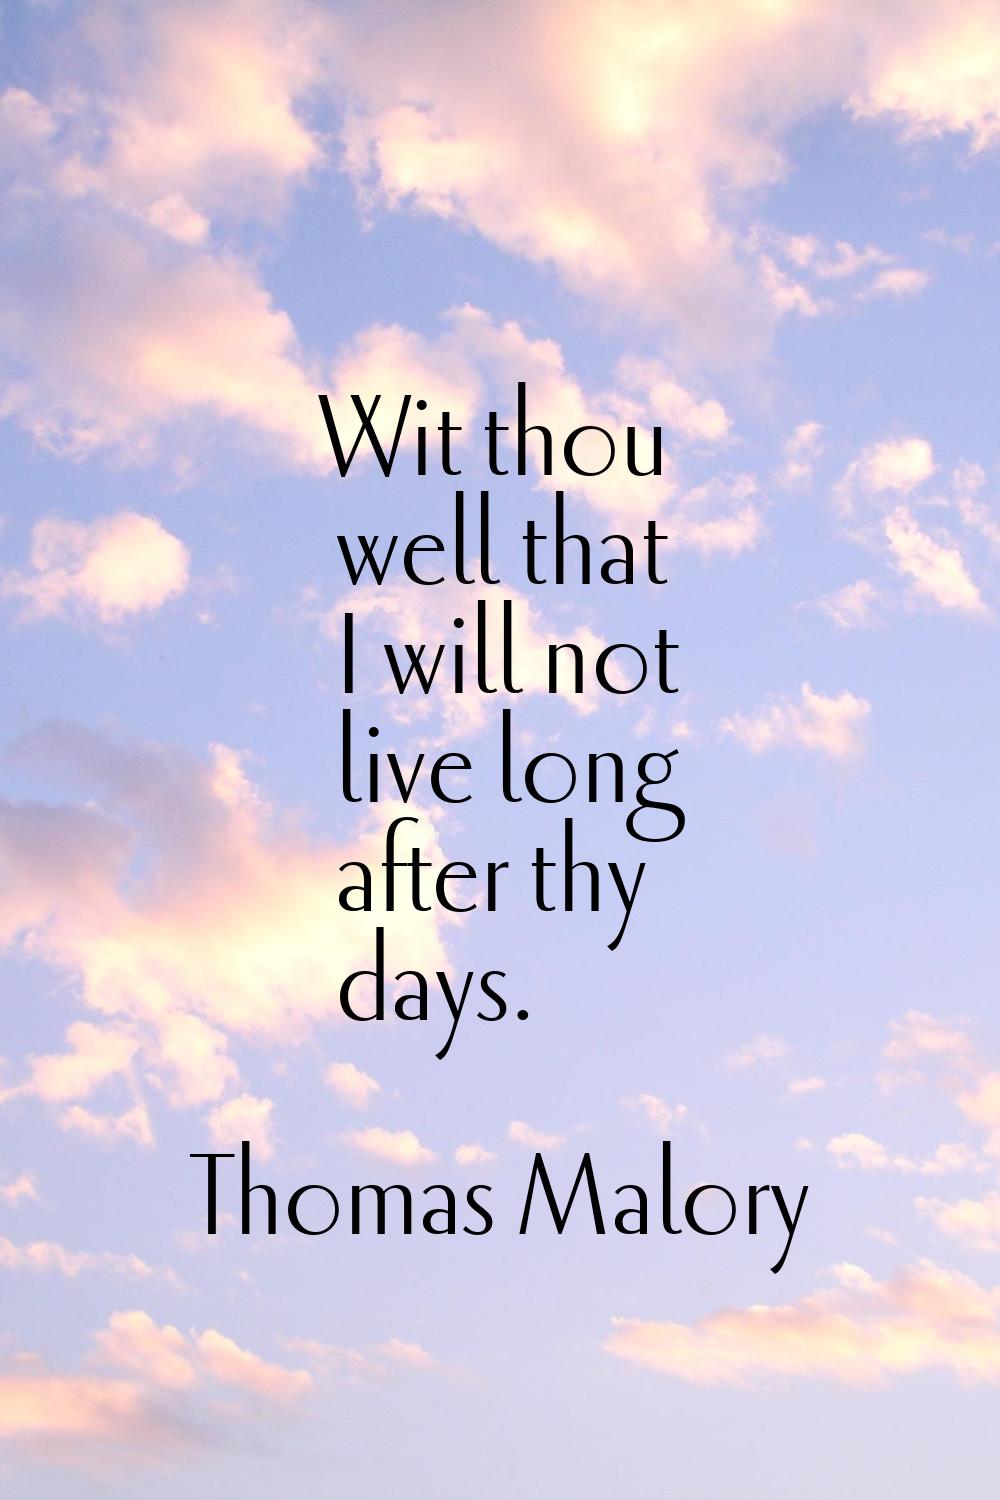 Wit thou well that I will not live long after thy days.